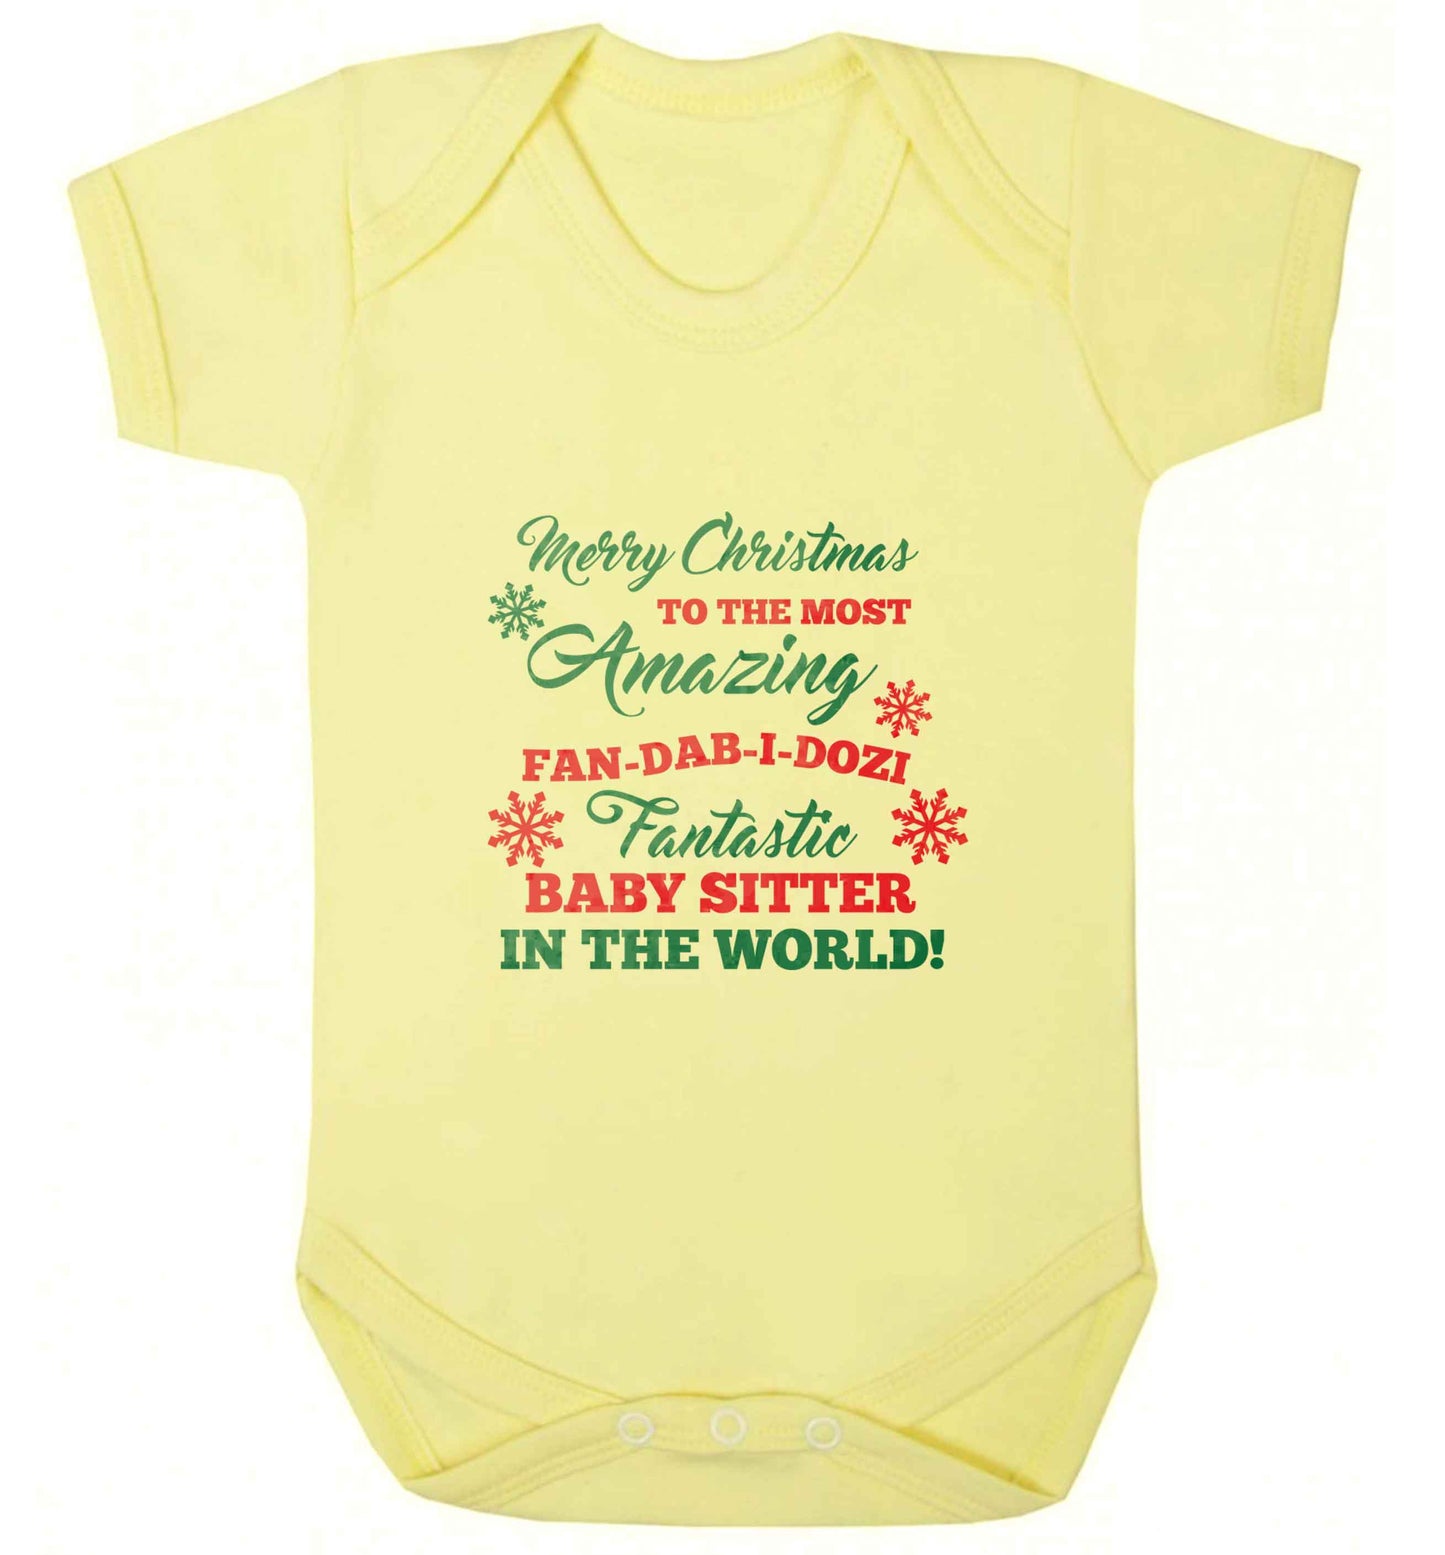 Merry Christmas to the most amazing fan-dab-i-dozi fantasic baby sitter in the world baby vest pale yellow 18-24 months